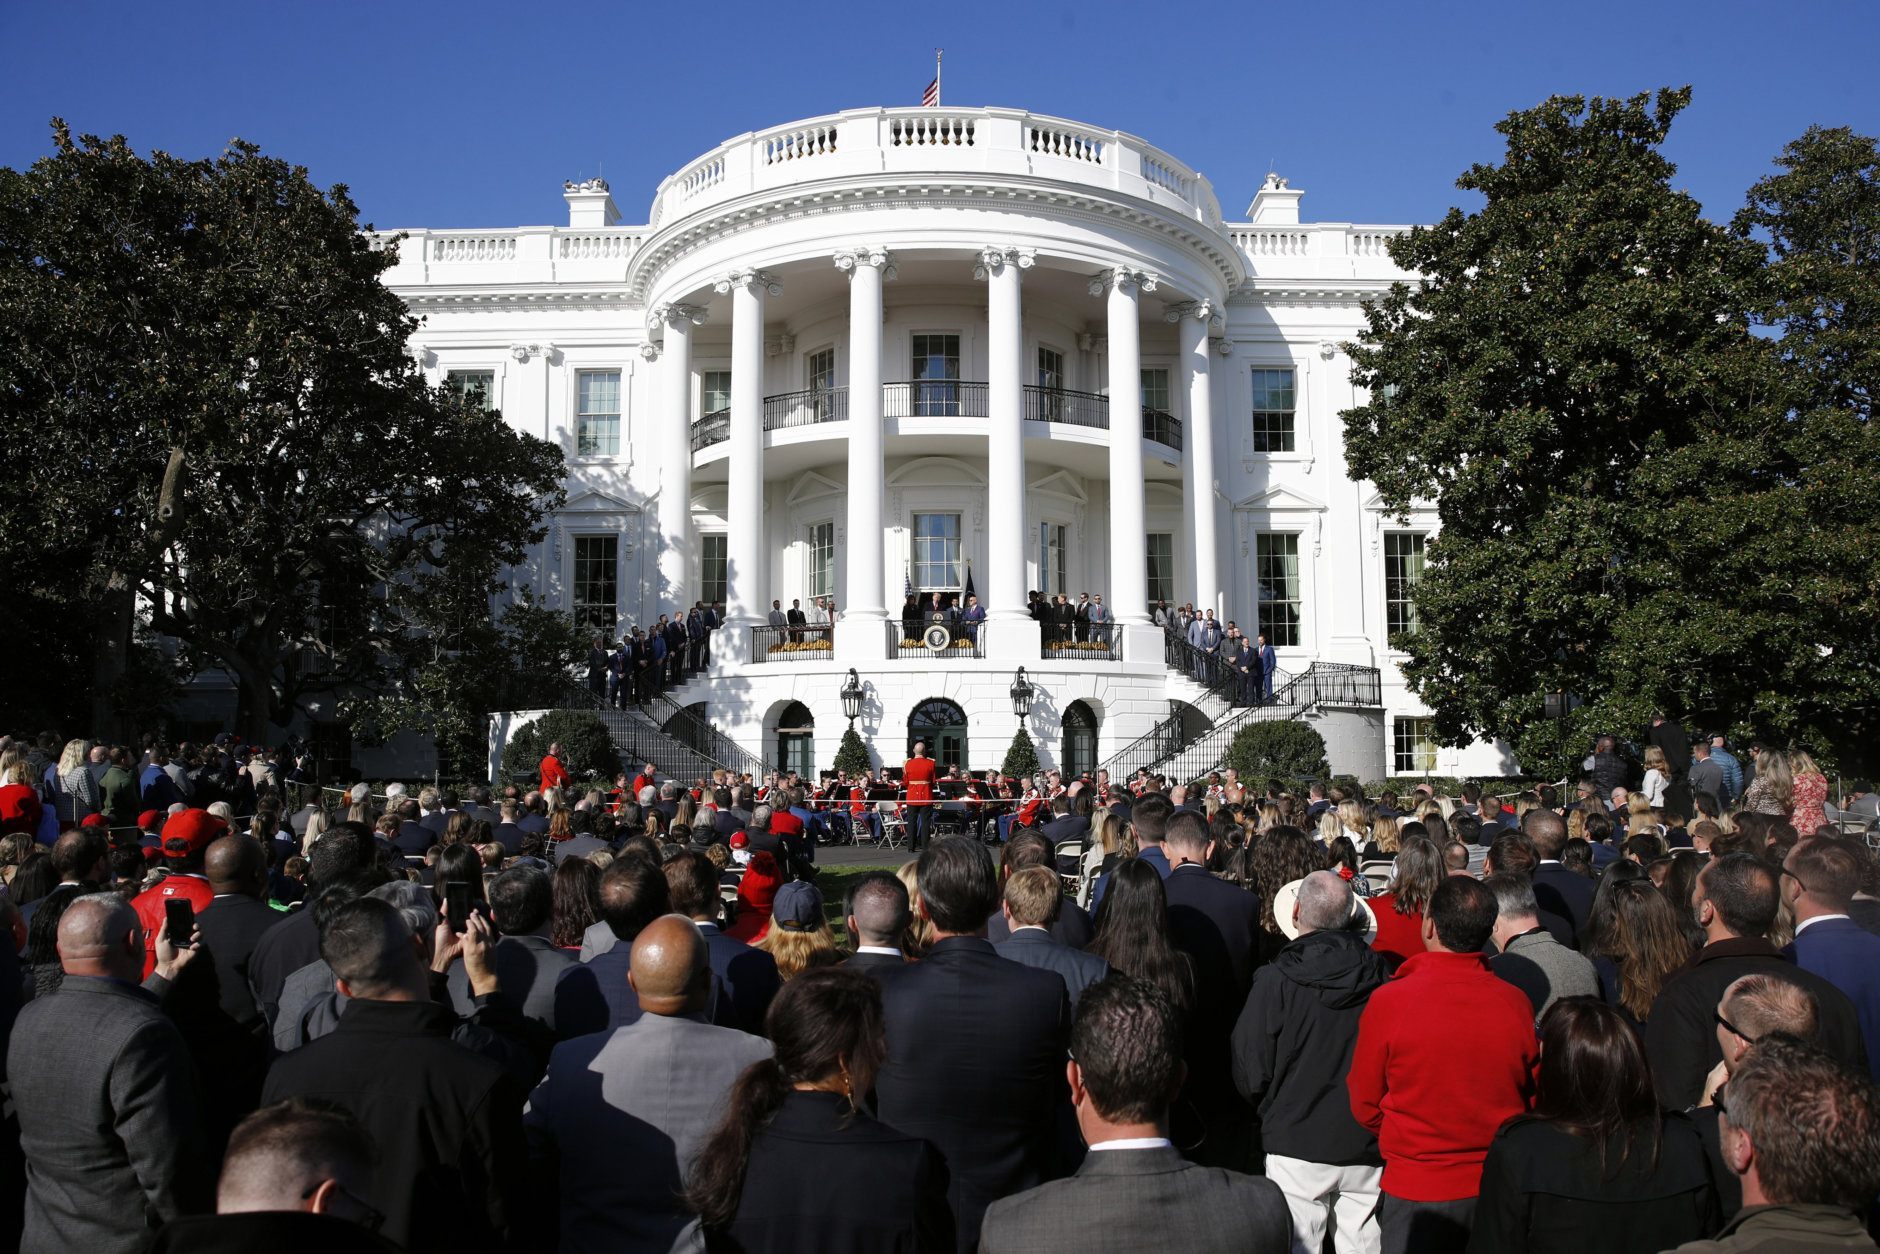 President Donald Trump speaks during an event to honor the 2019 World Series champion Washington Nationals at the White House, Monday, Nov. 4, 2019, in Washington. (AP Photo/Patrick Semansky)